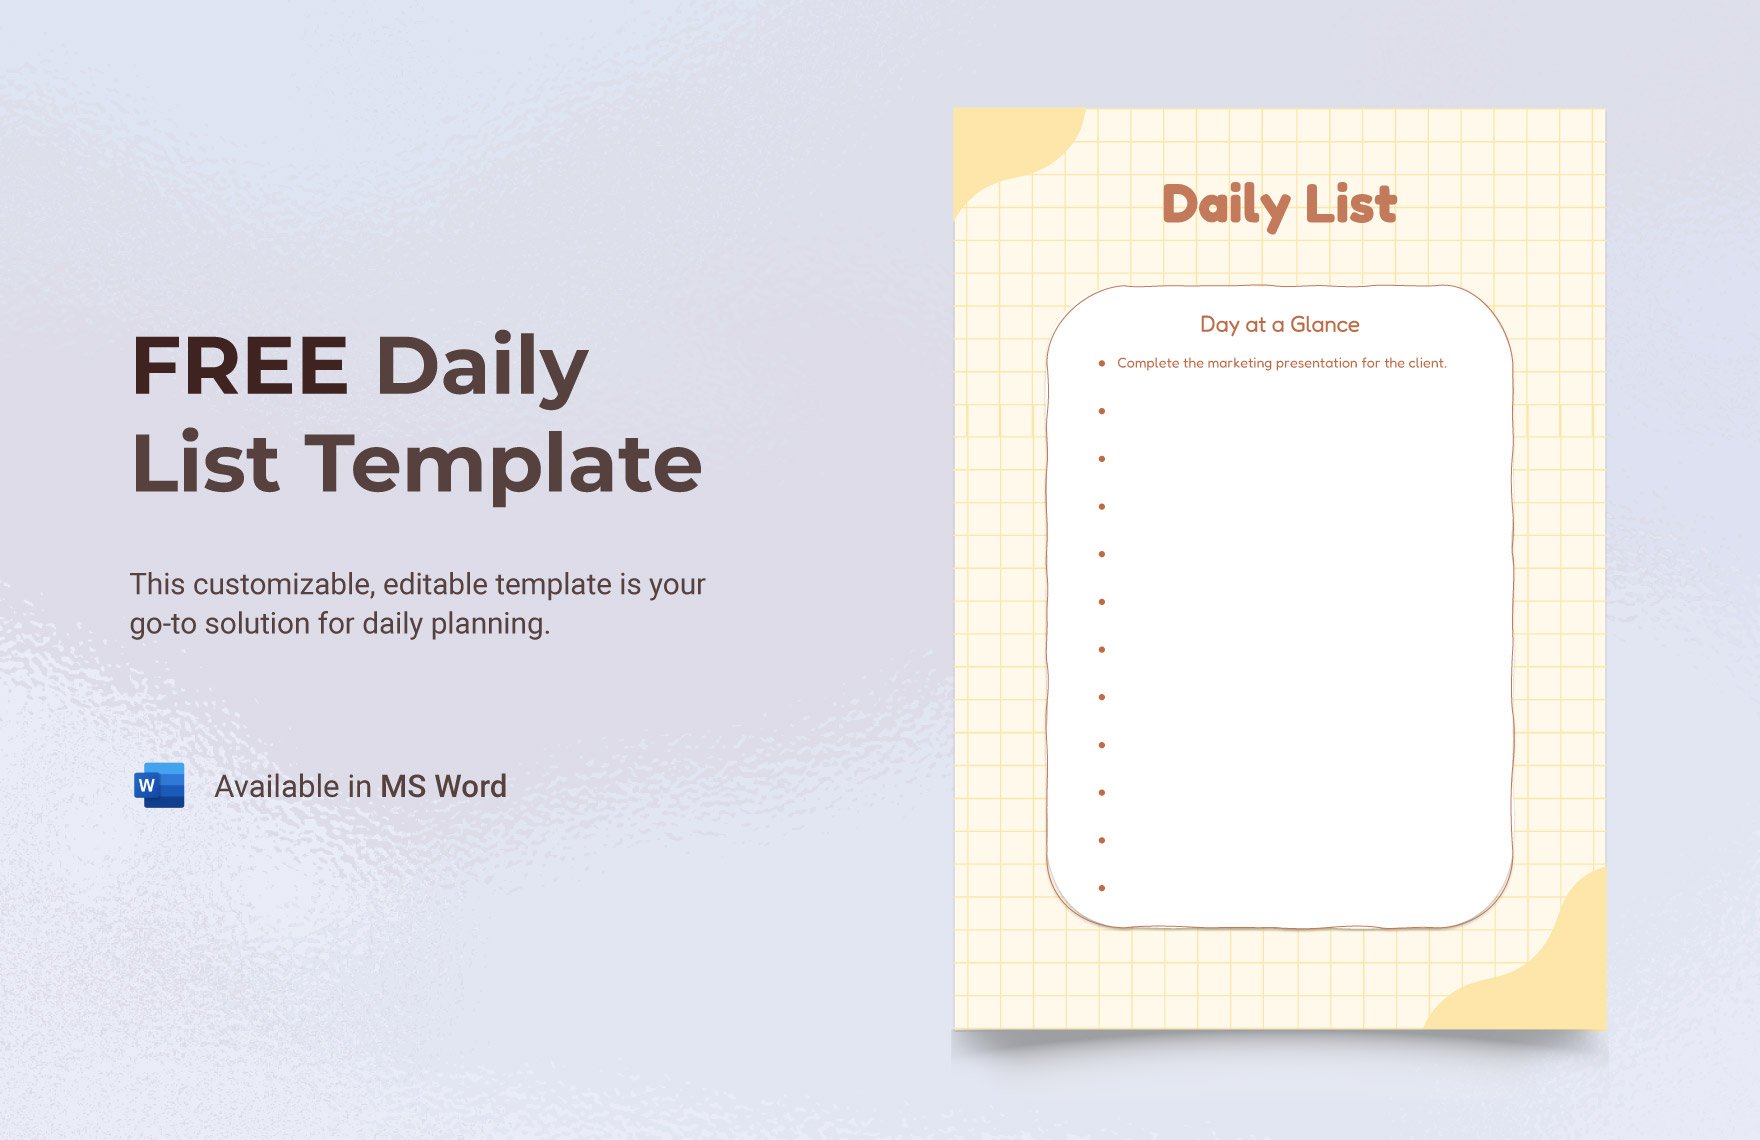 Daily List Template